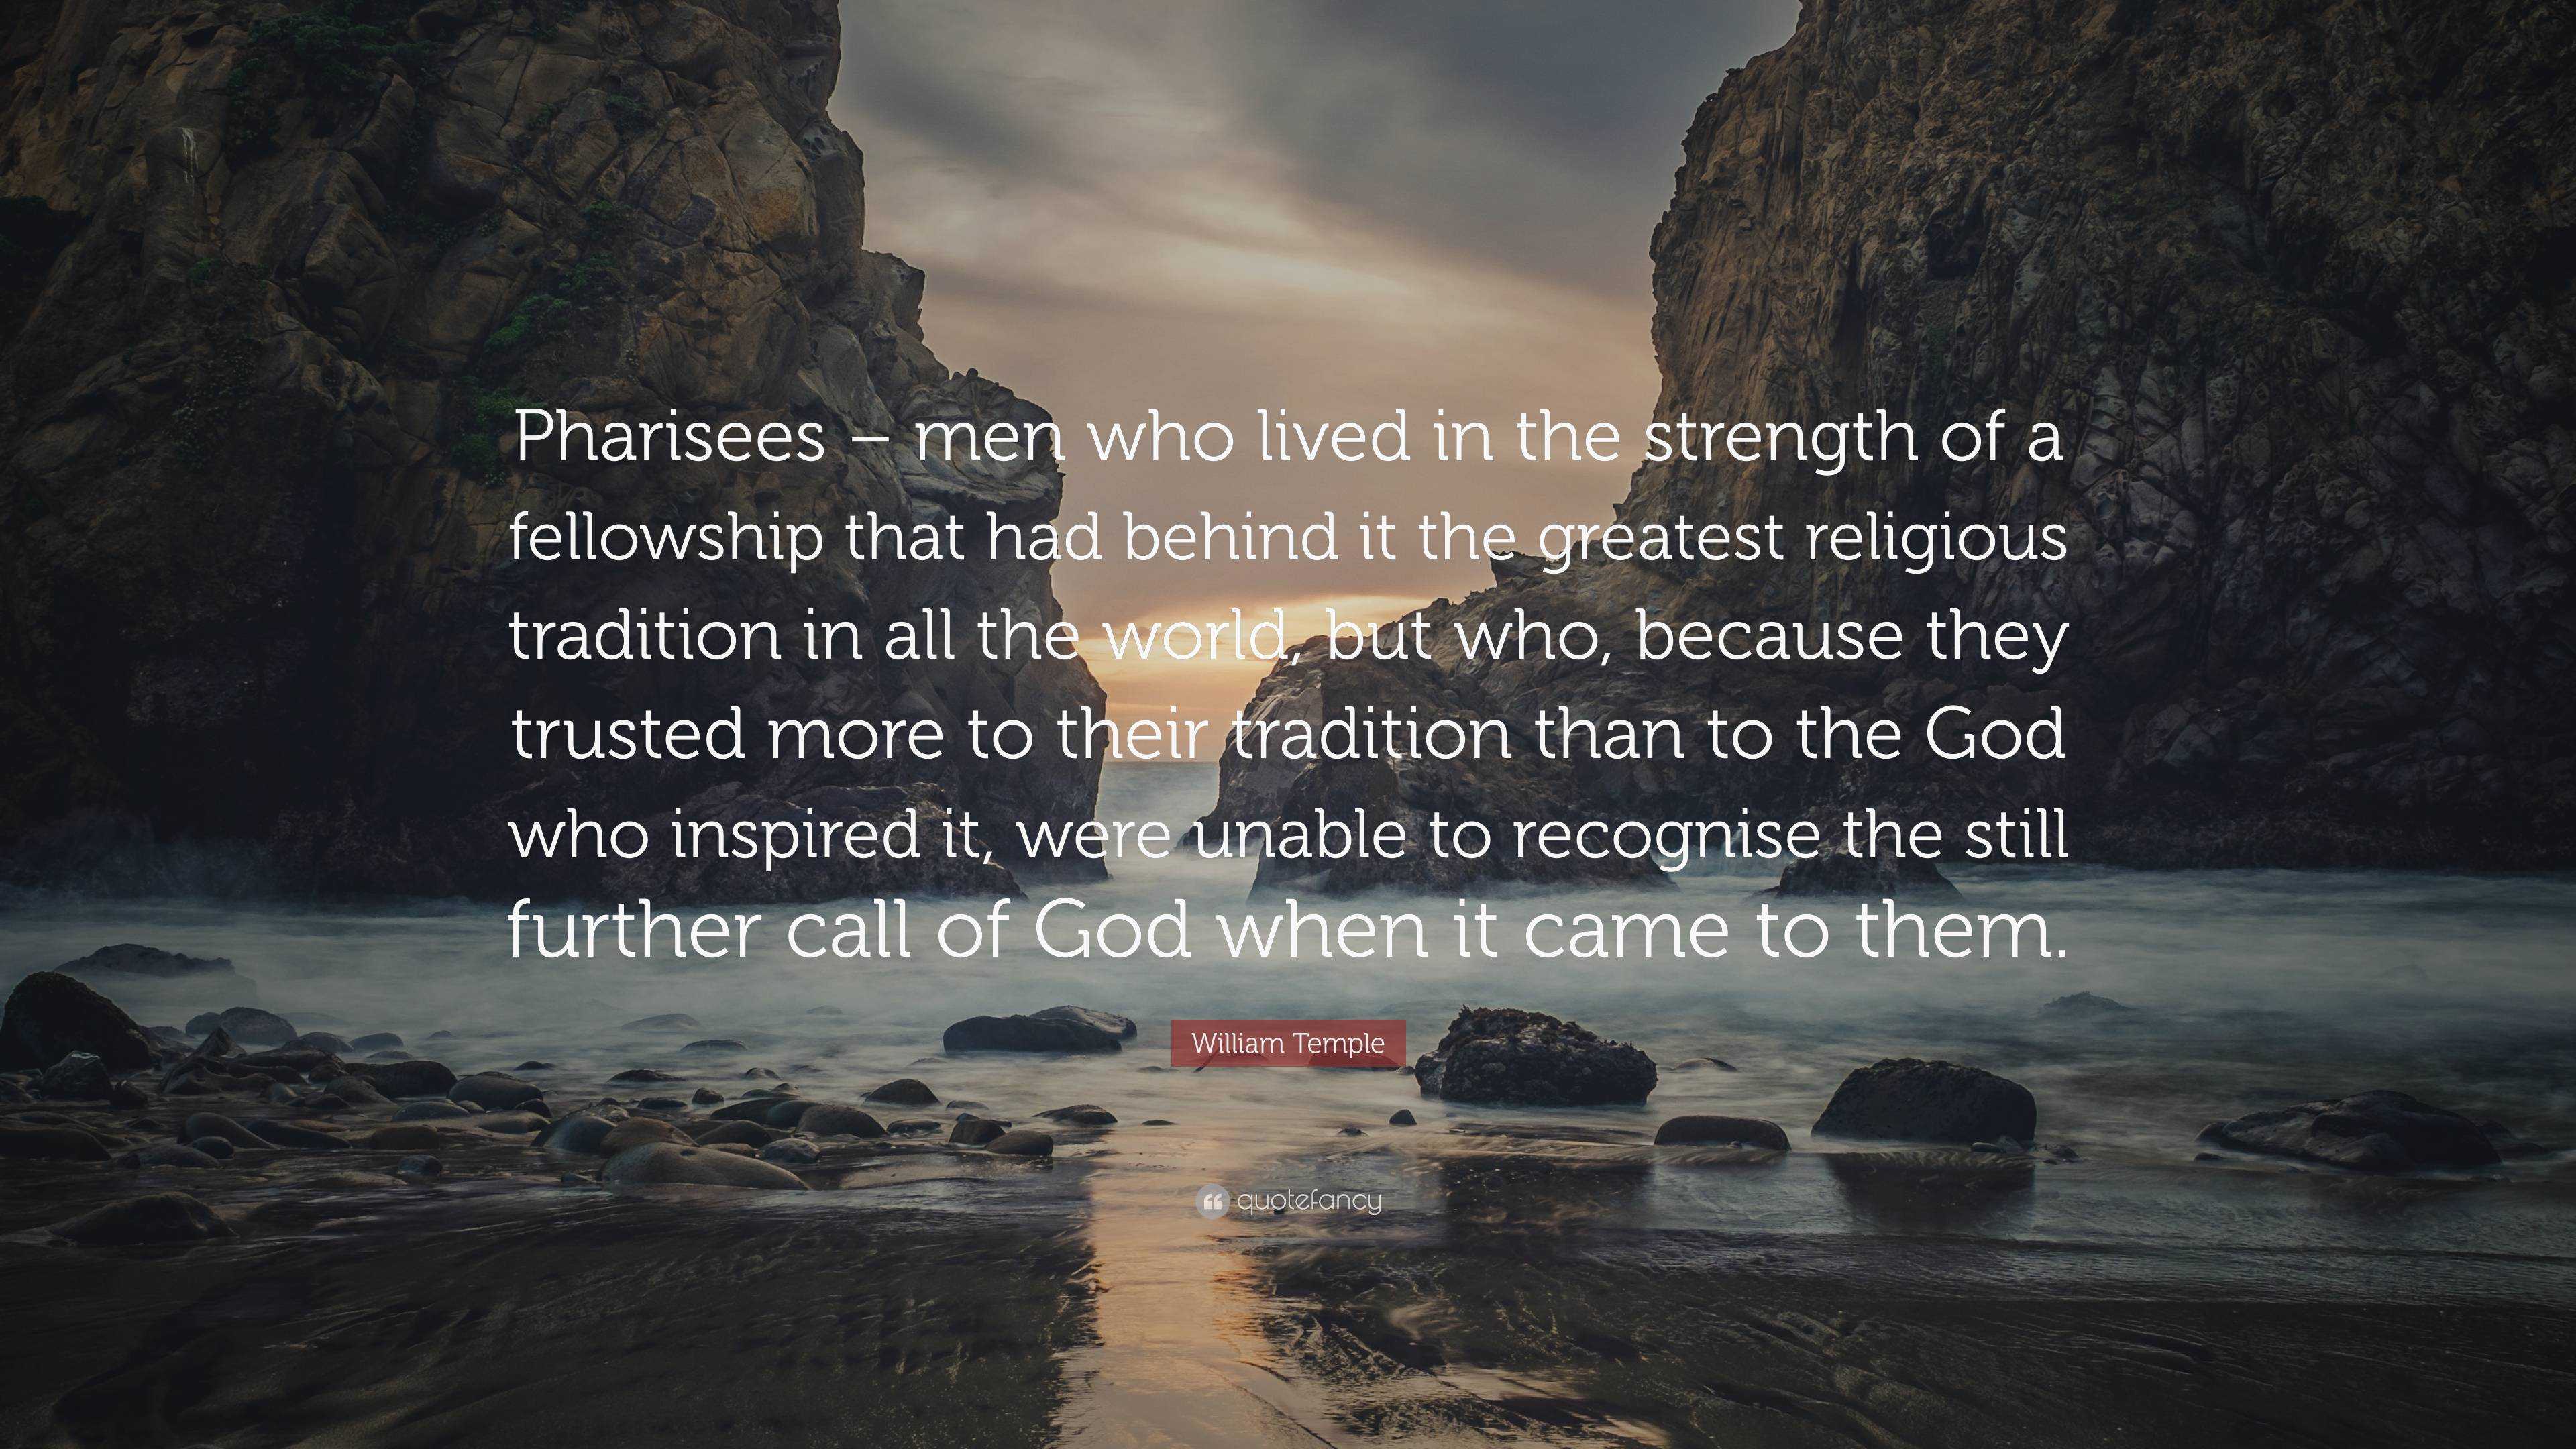 William Temple Quote: “Pharisees – men who lived in the strength of a ...